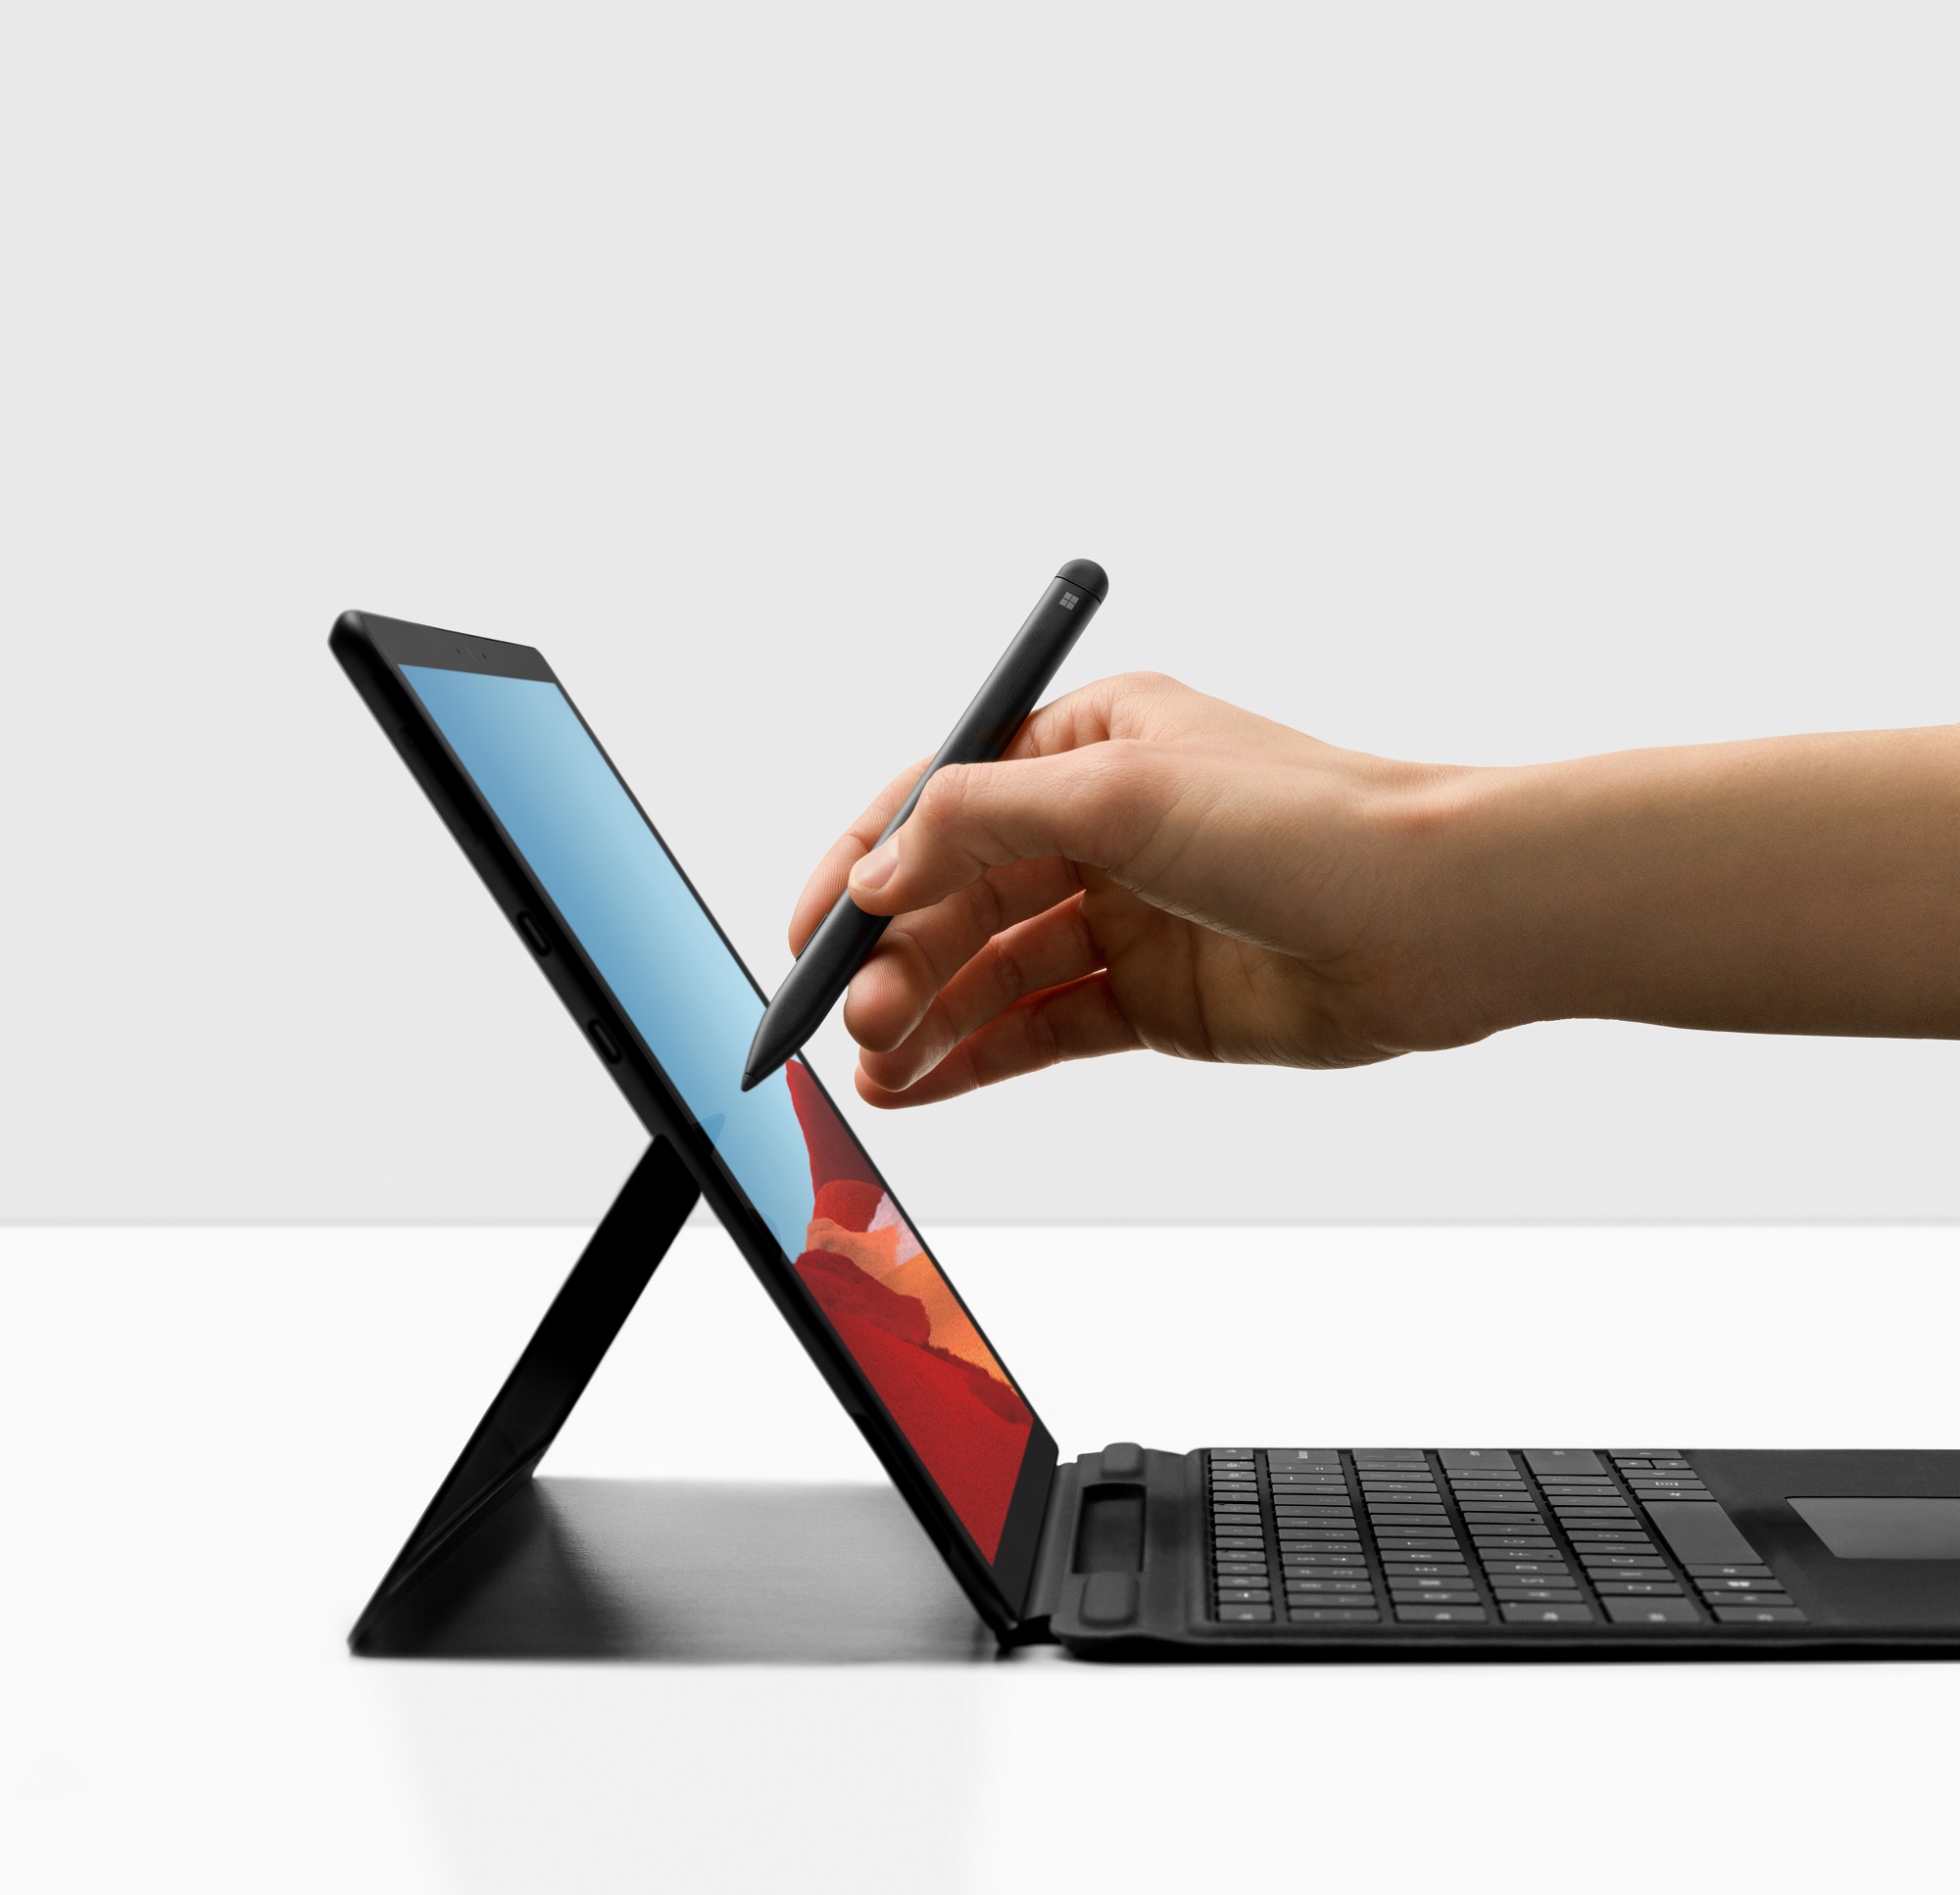 A hand using a pen on a Surface Pro X